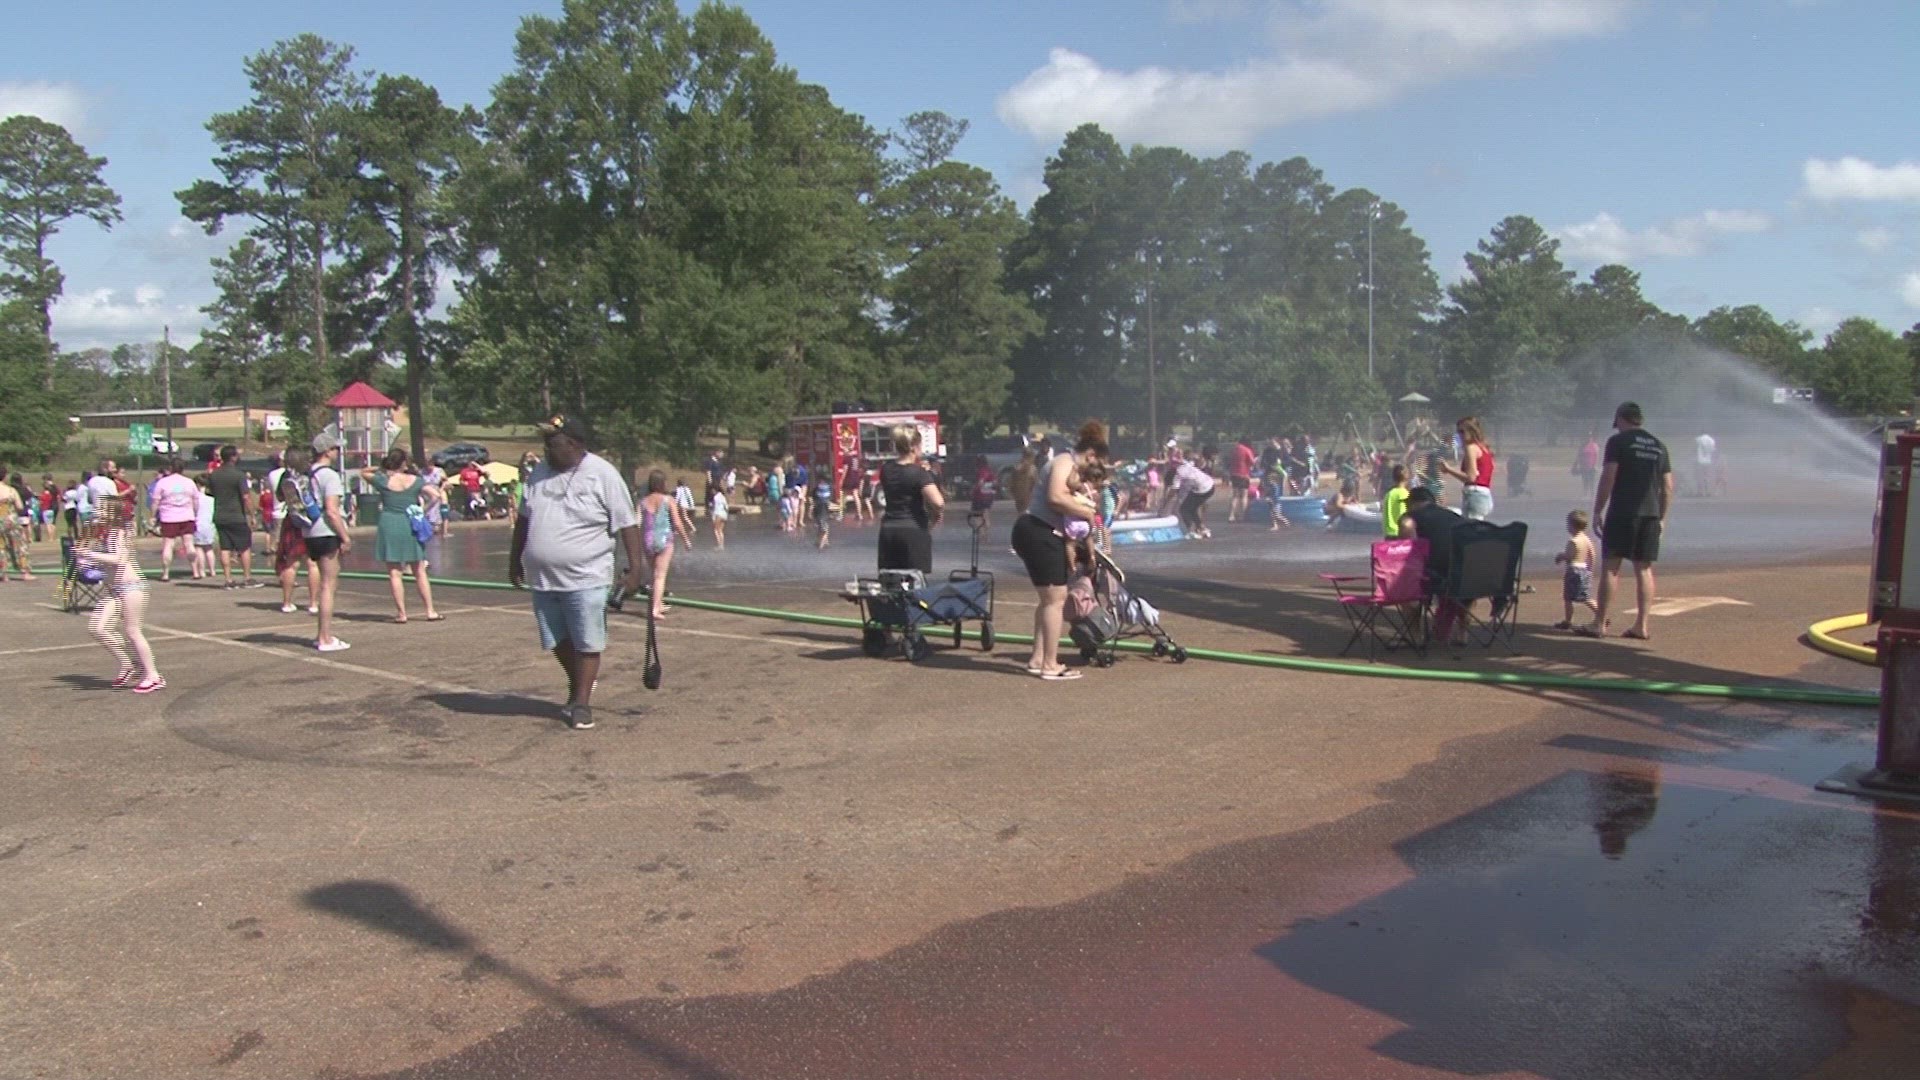 The event featured dueling firetrucks that sprayed water to keep the community cool.